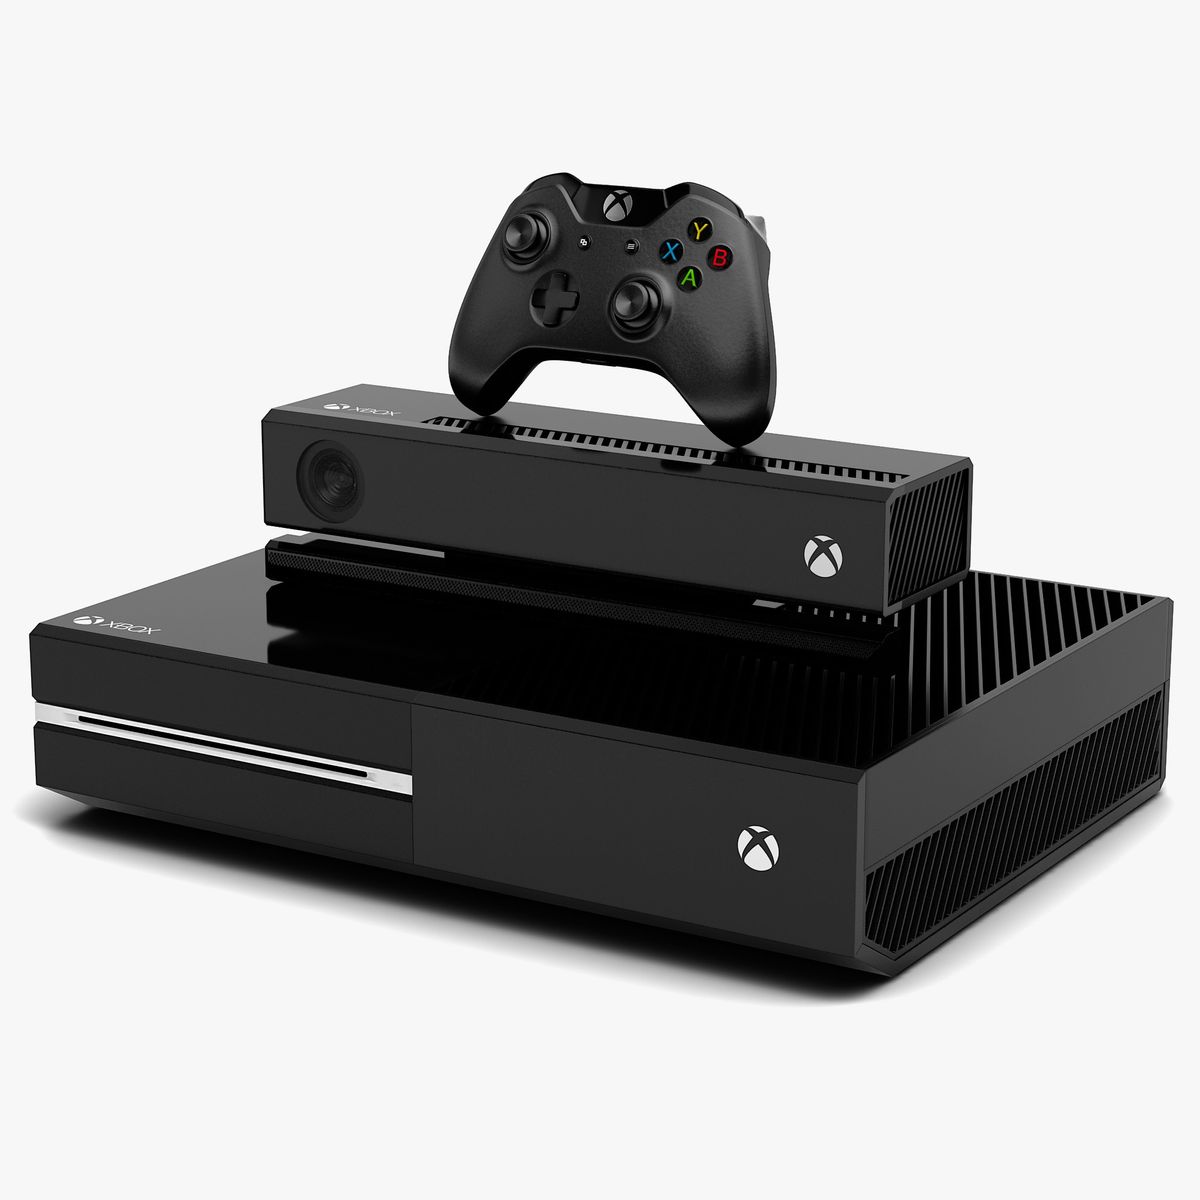 Microsoft Xbox One Review: Everything You Need to Know